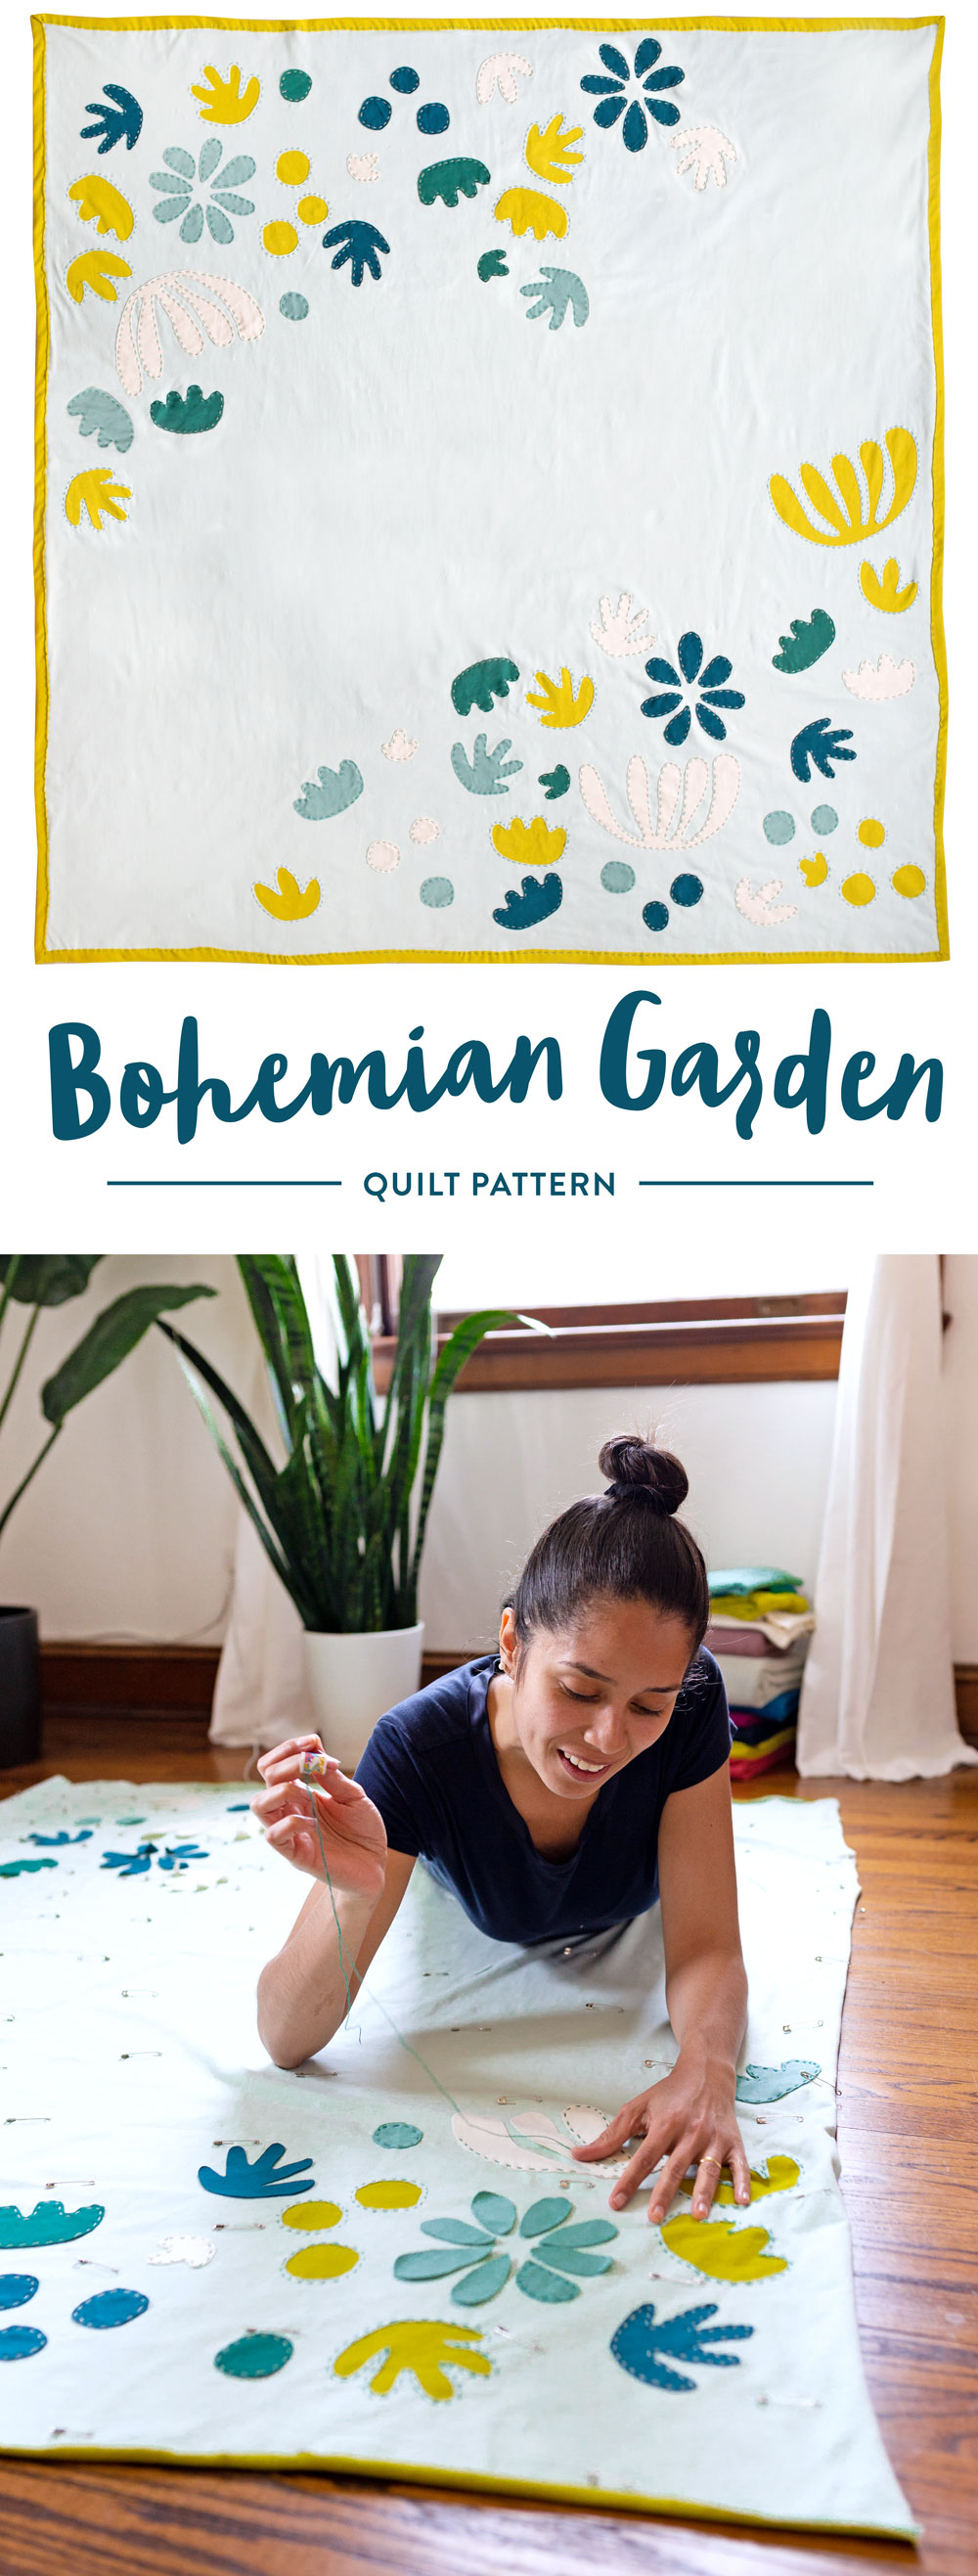 The Bohemian Garden quilt pattern includes three variations – one of them is a whole-cloth quilt!